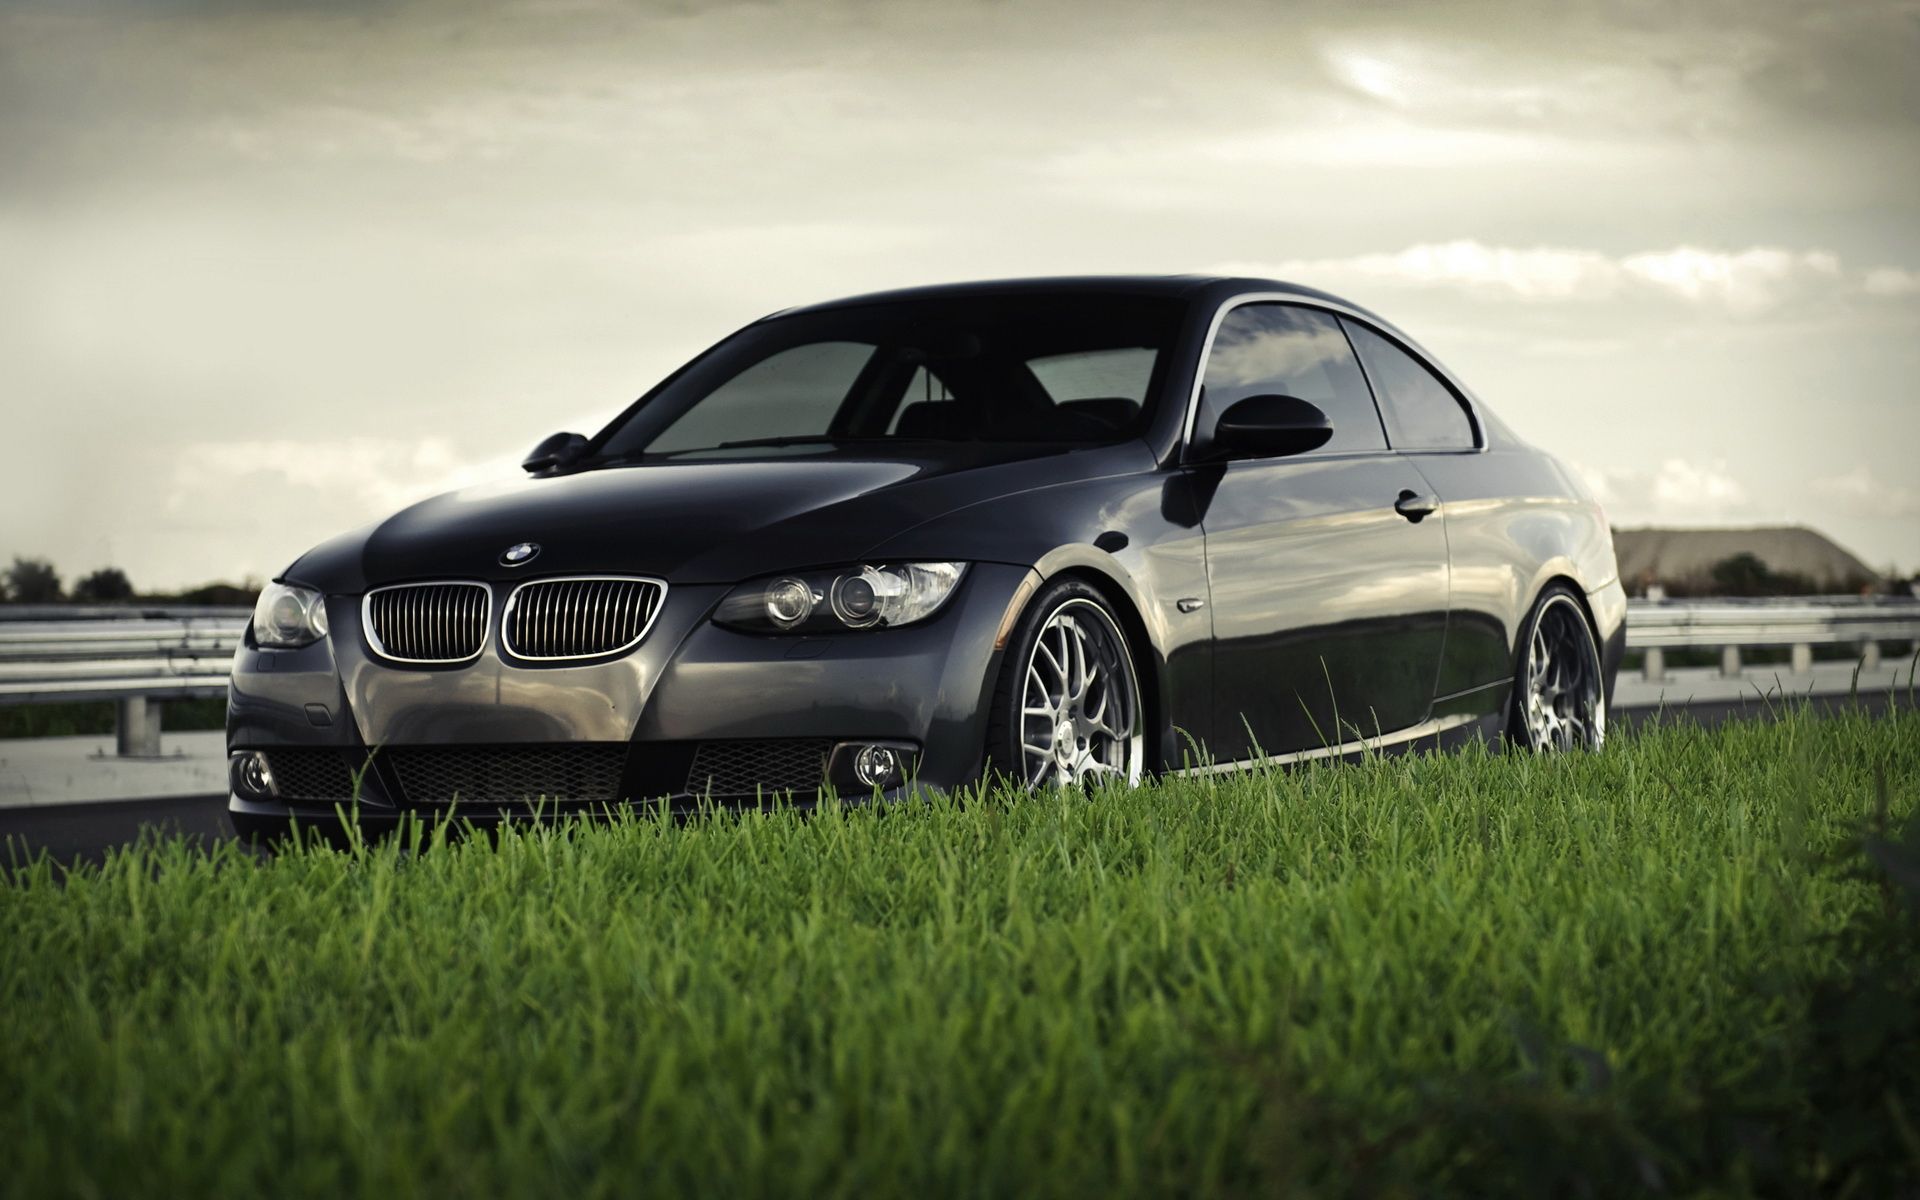 BMW 335 Wallpapers - Wallpaper Cave